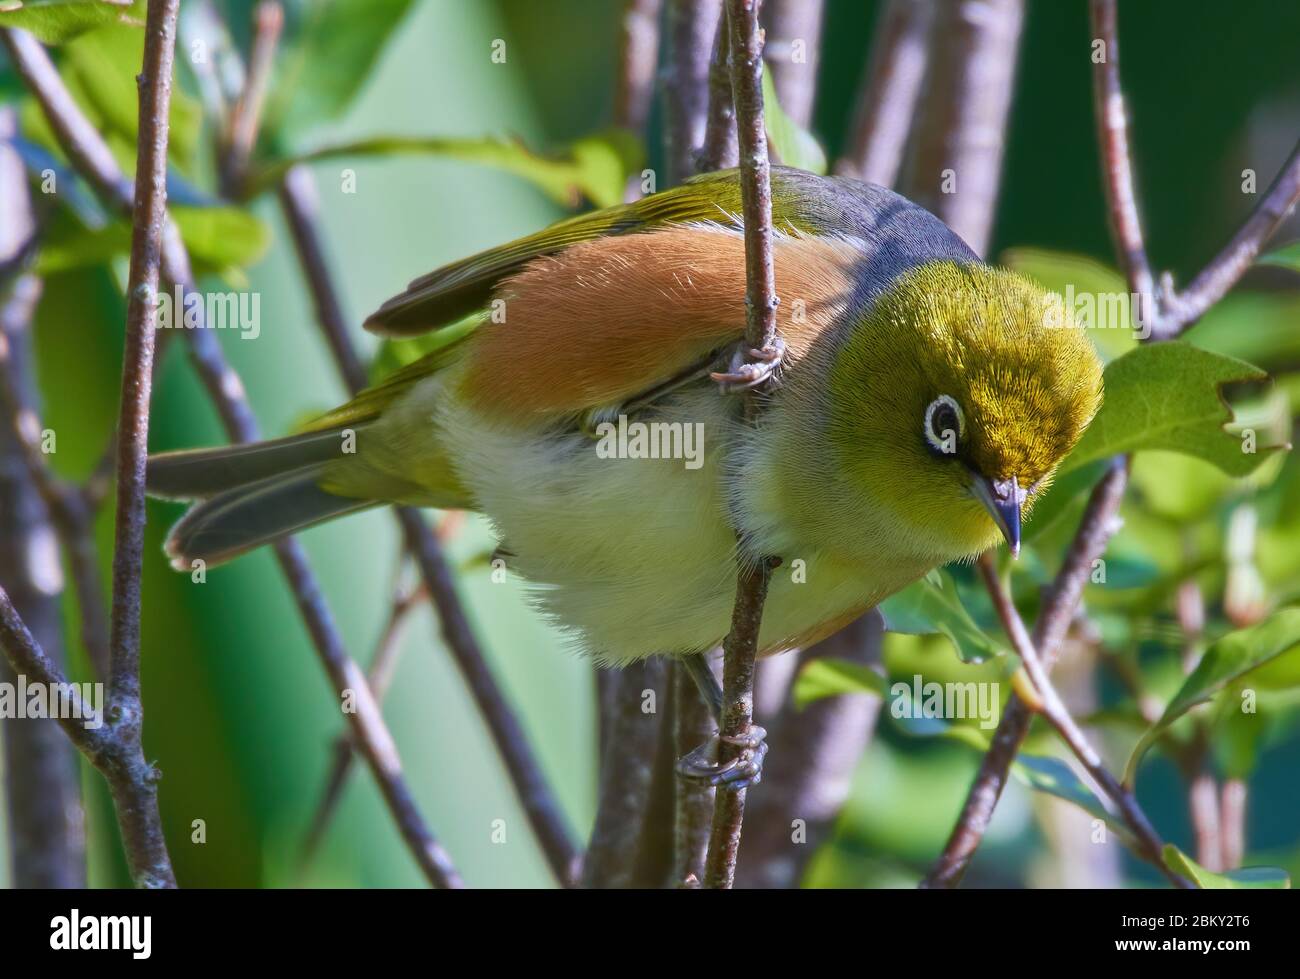 Silvereye perched in a forest setting Stock Photo